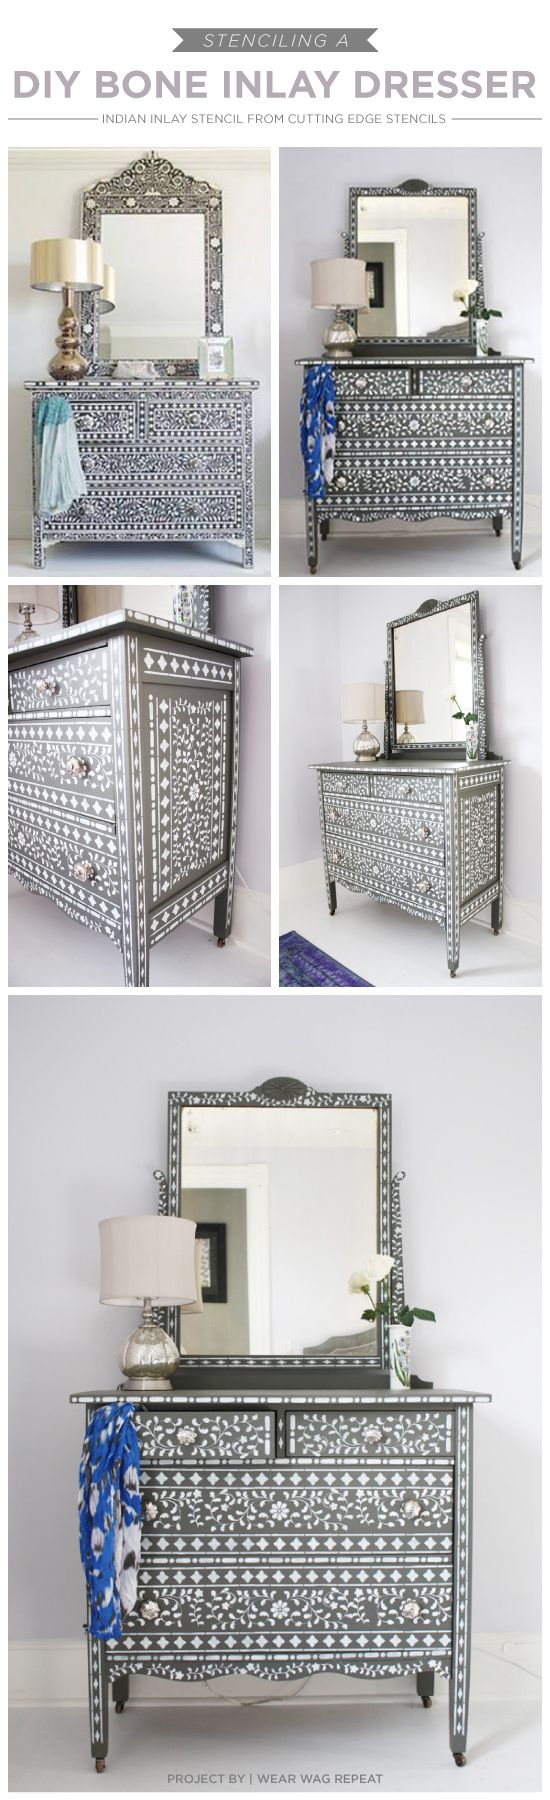 15 Bedroom Furniture Projects that Don't Look Homemade